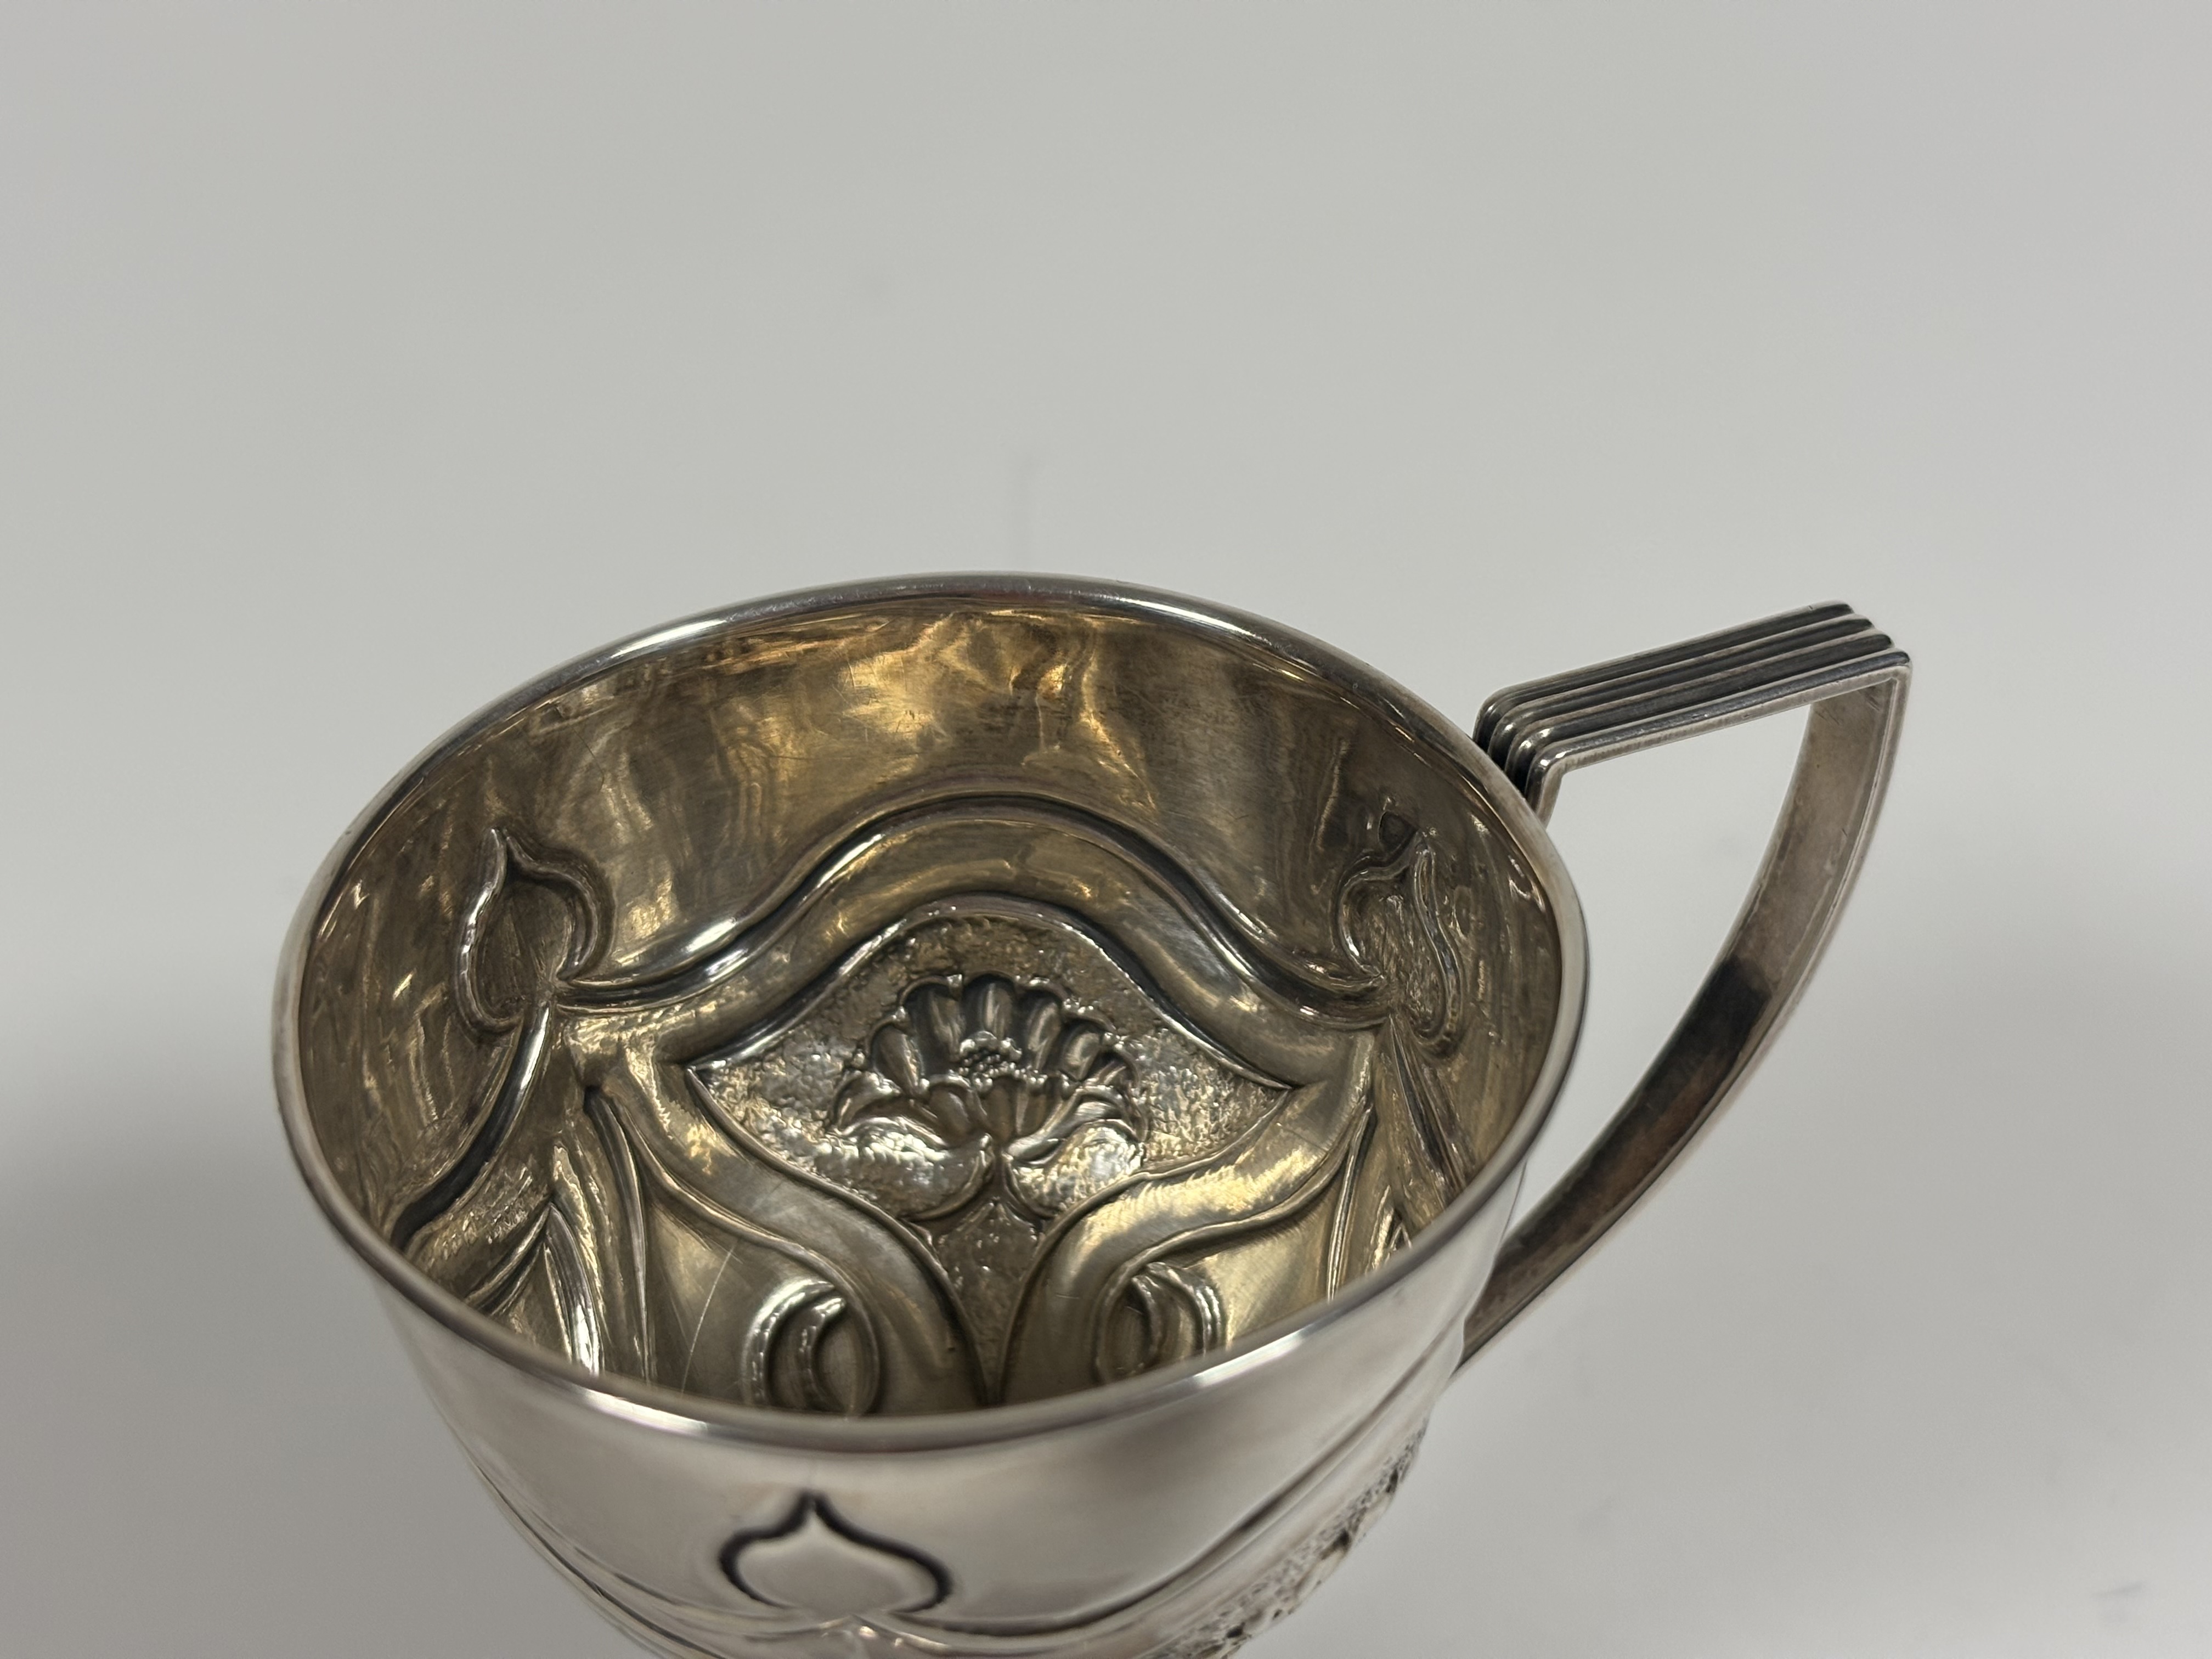 An Edwardian silver Christening cup in the Art Nouveau taste, Robert Pringle & Sons, Chester, - Image 5 of 7